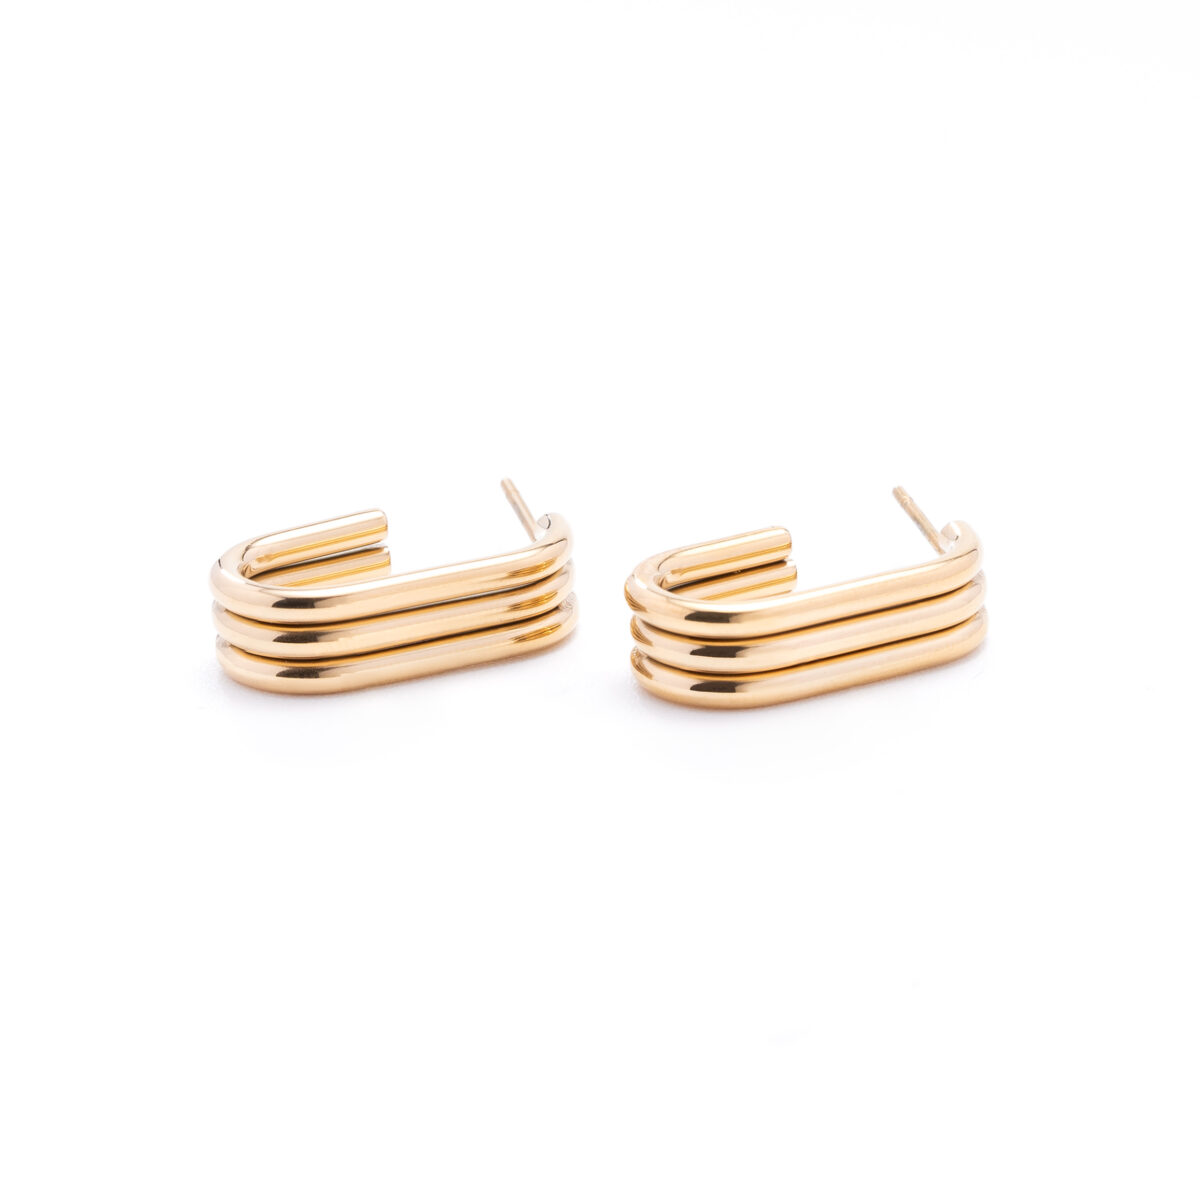 https://m.clubbella.co/product/new-york-essential-earrings/ pro-15